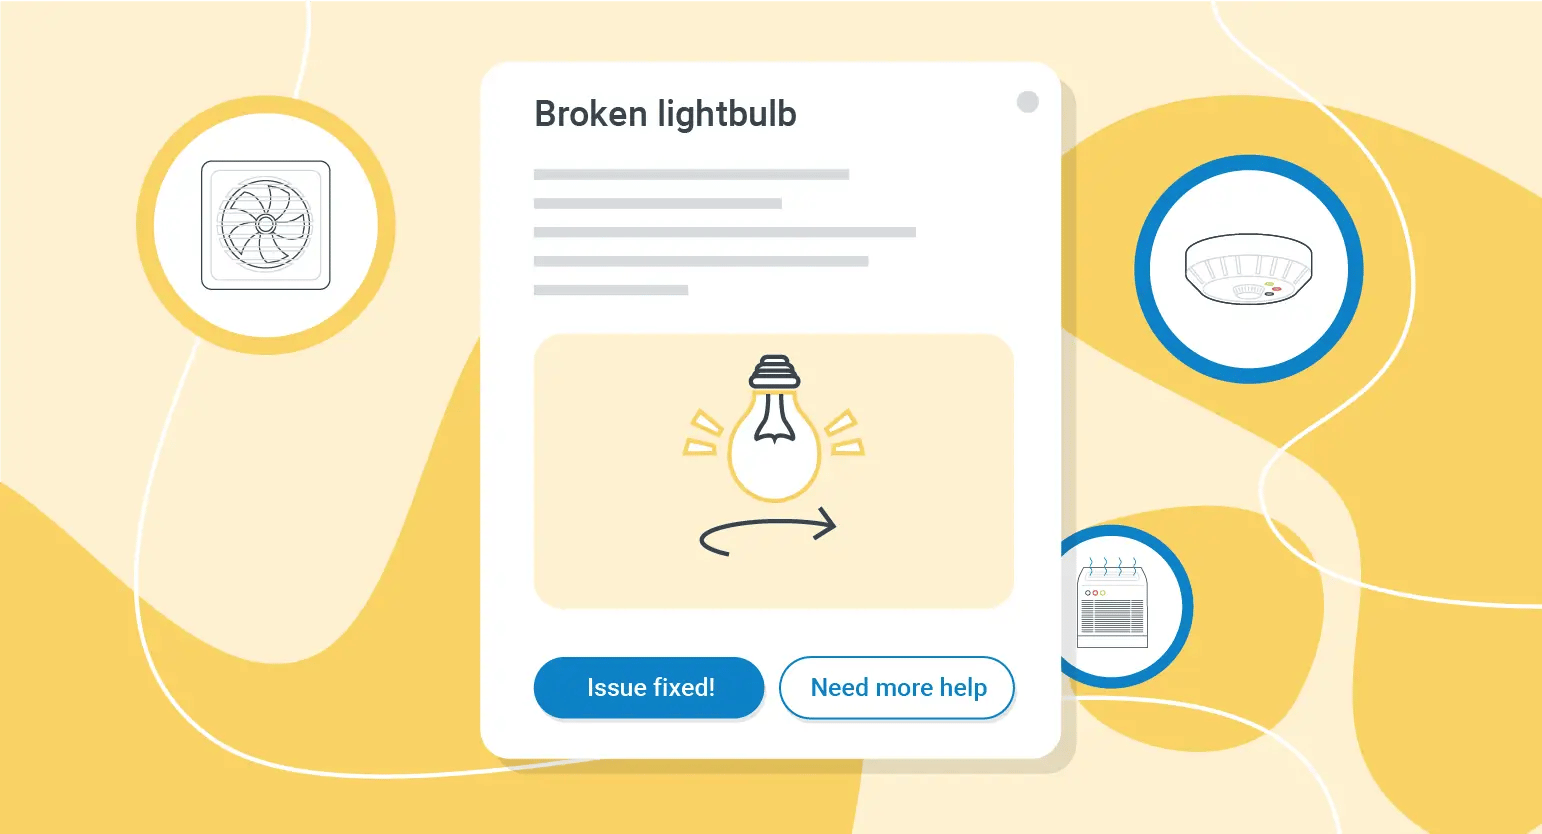 An illustration of Fixflo's repair reporting tool offering tenants guidance to repair a minor broken lightbulb issue themselves